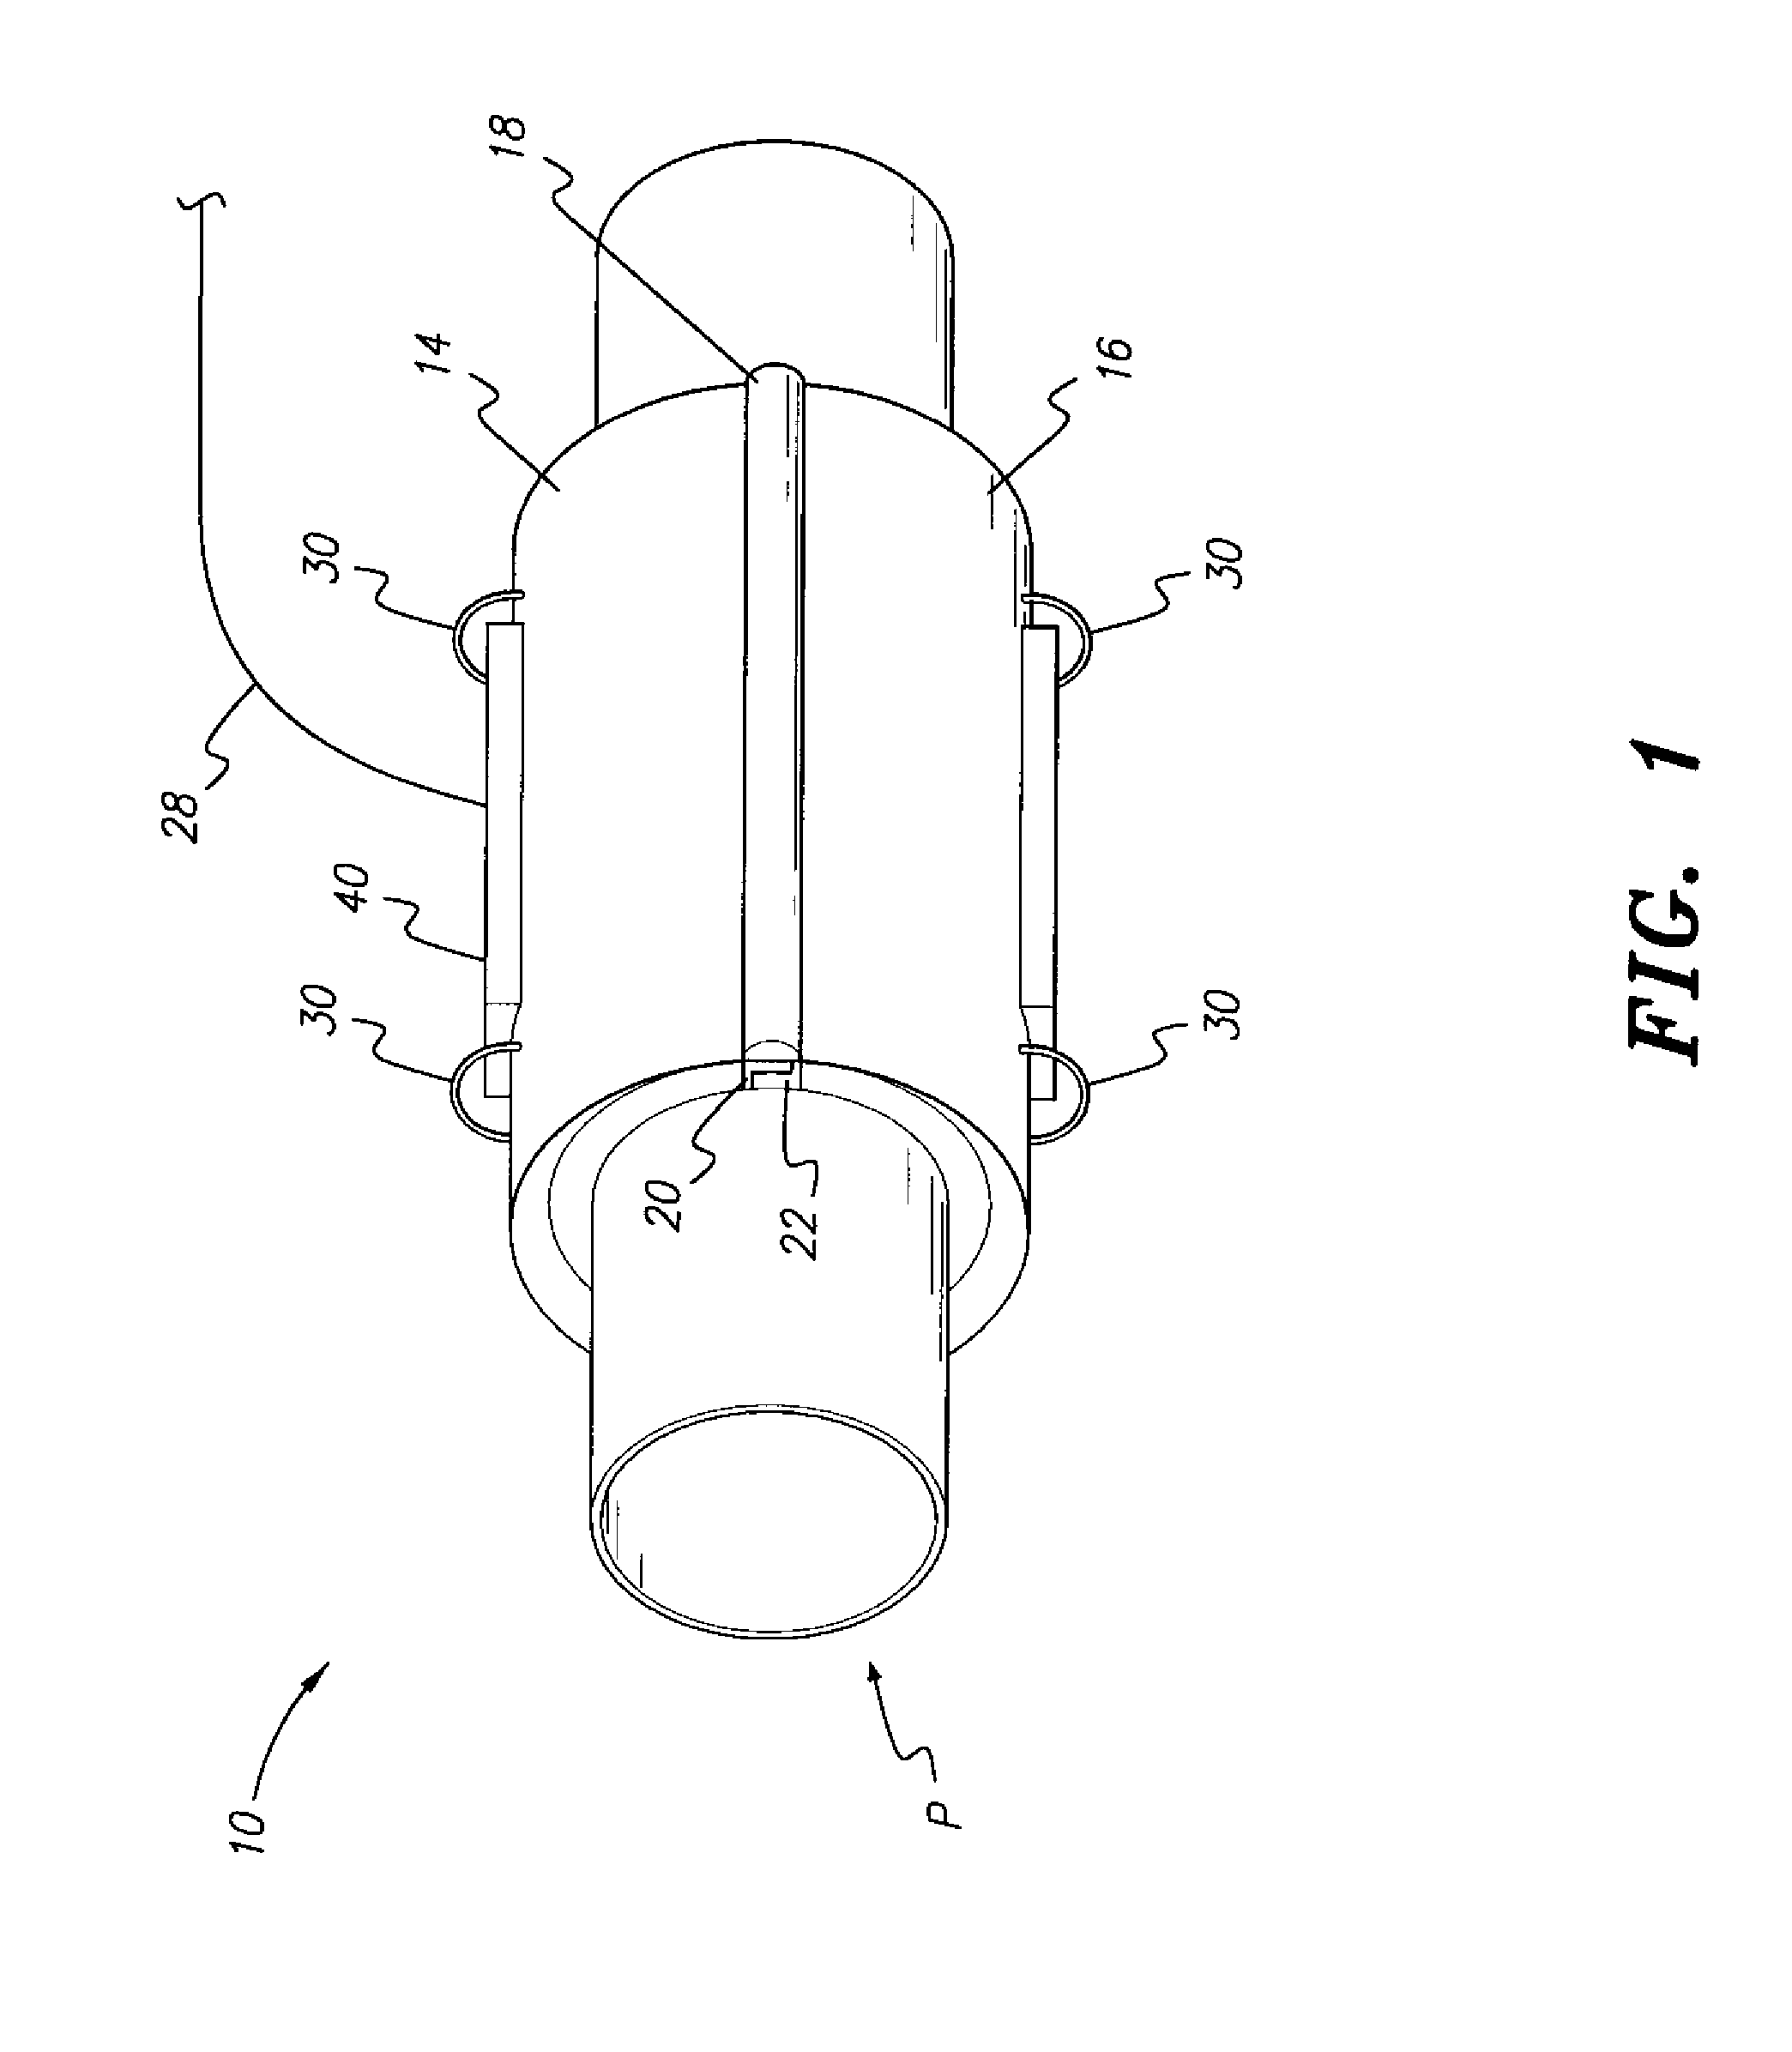 Acoustic leak detection system and method with enviromental noise isolation